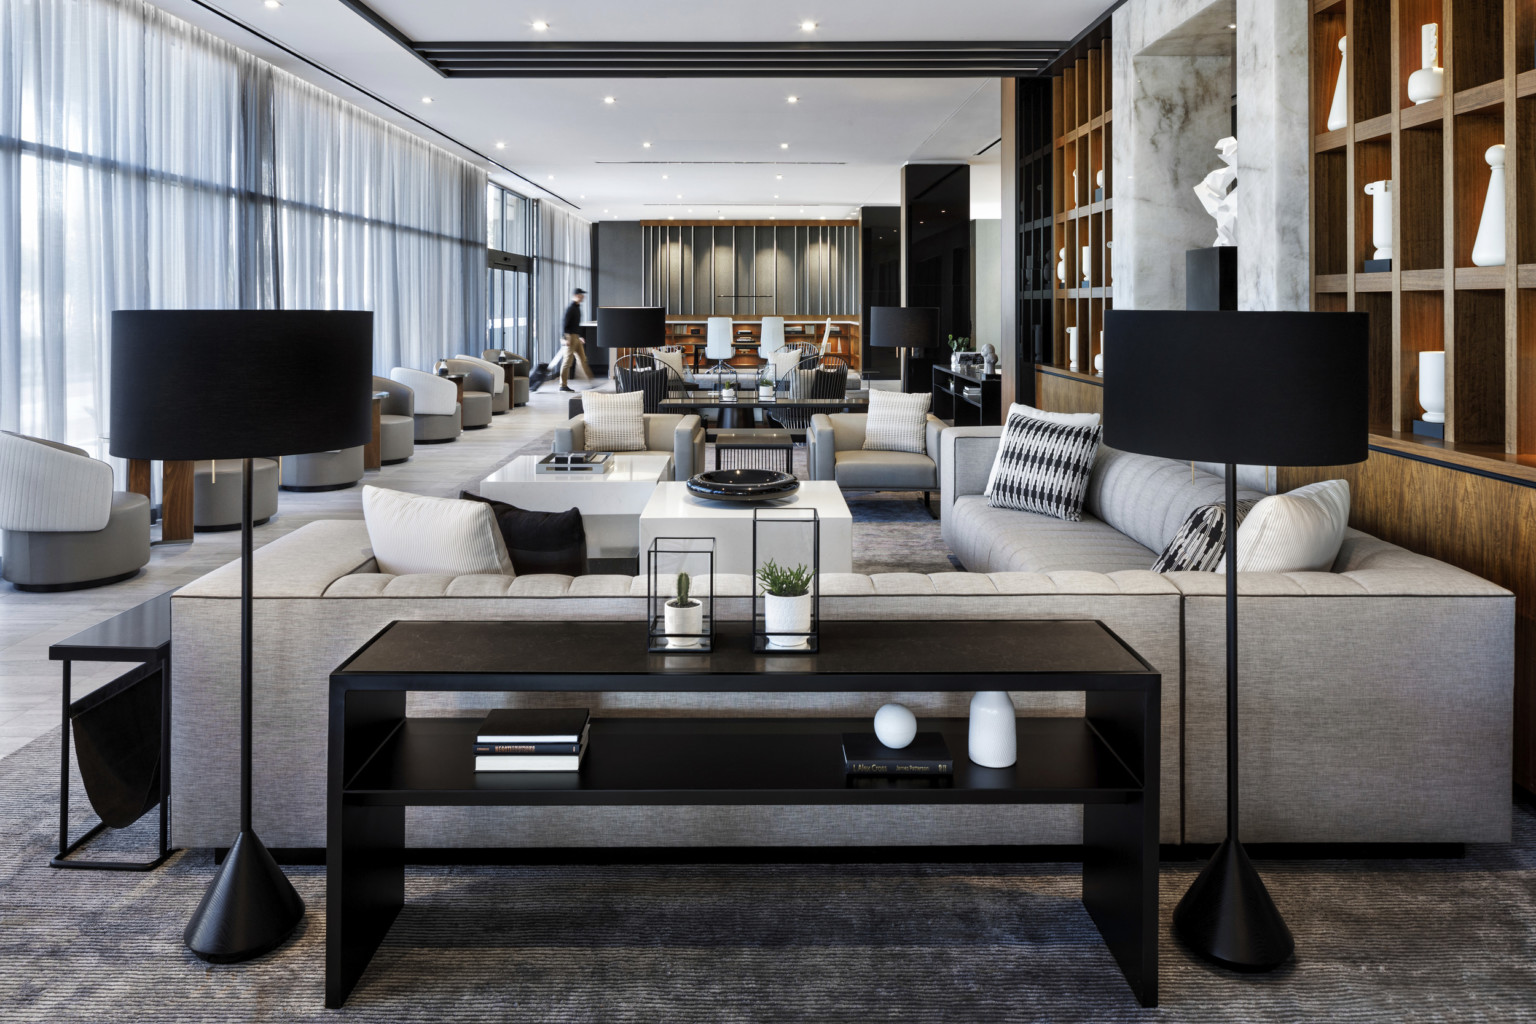 monochromatic hotel lobby with black floor lamps, black table and gray sofa